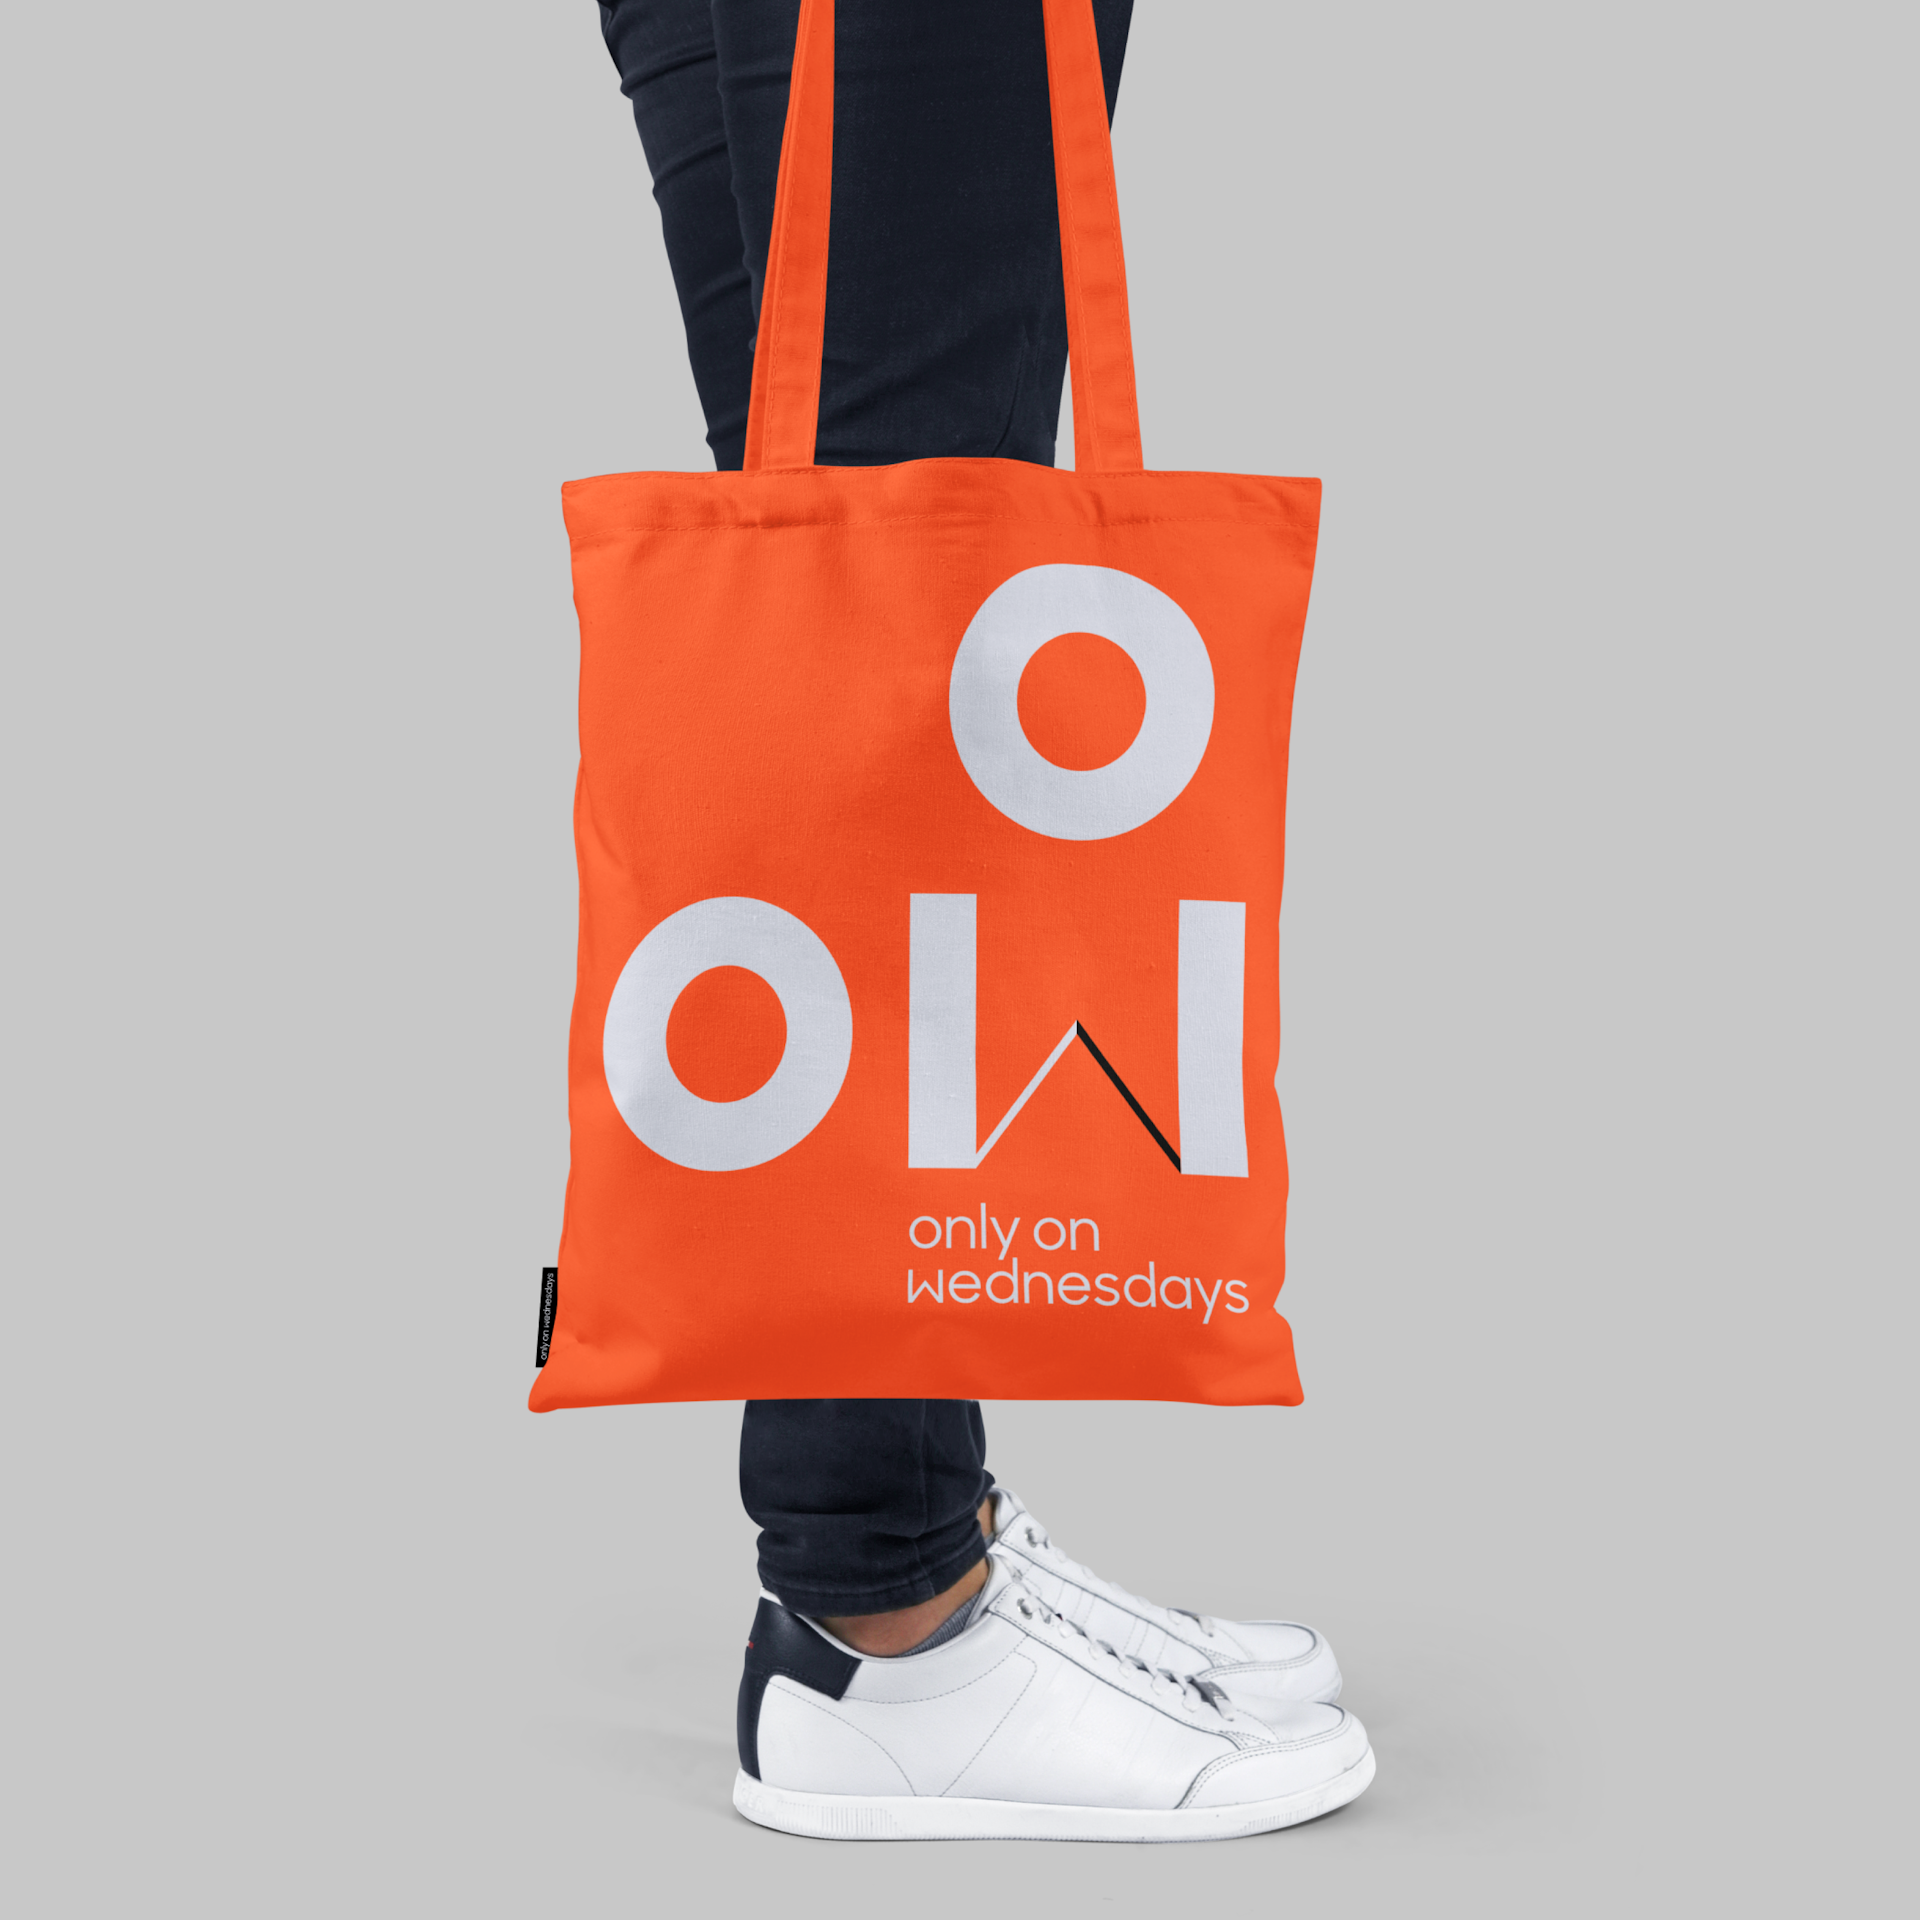 Only on Wednesdays branded orange tote bag being carried at a person's side